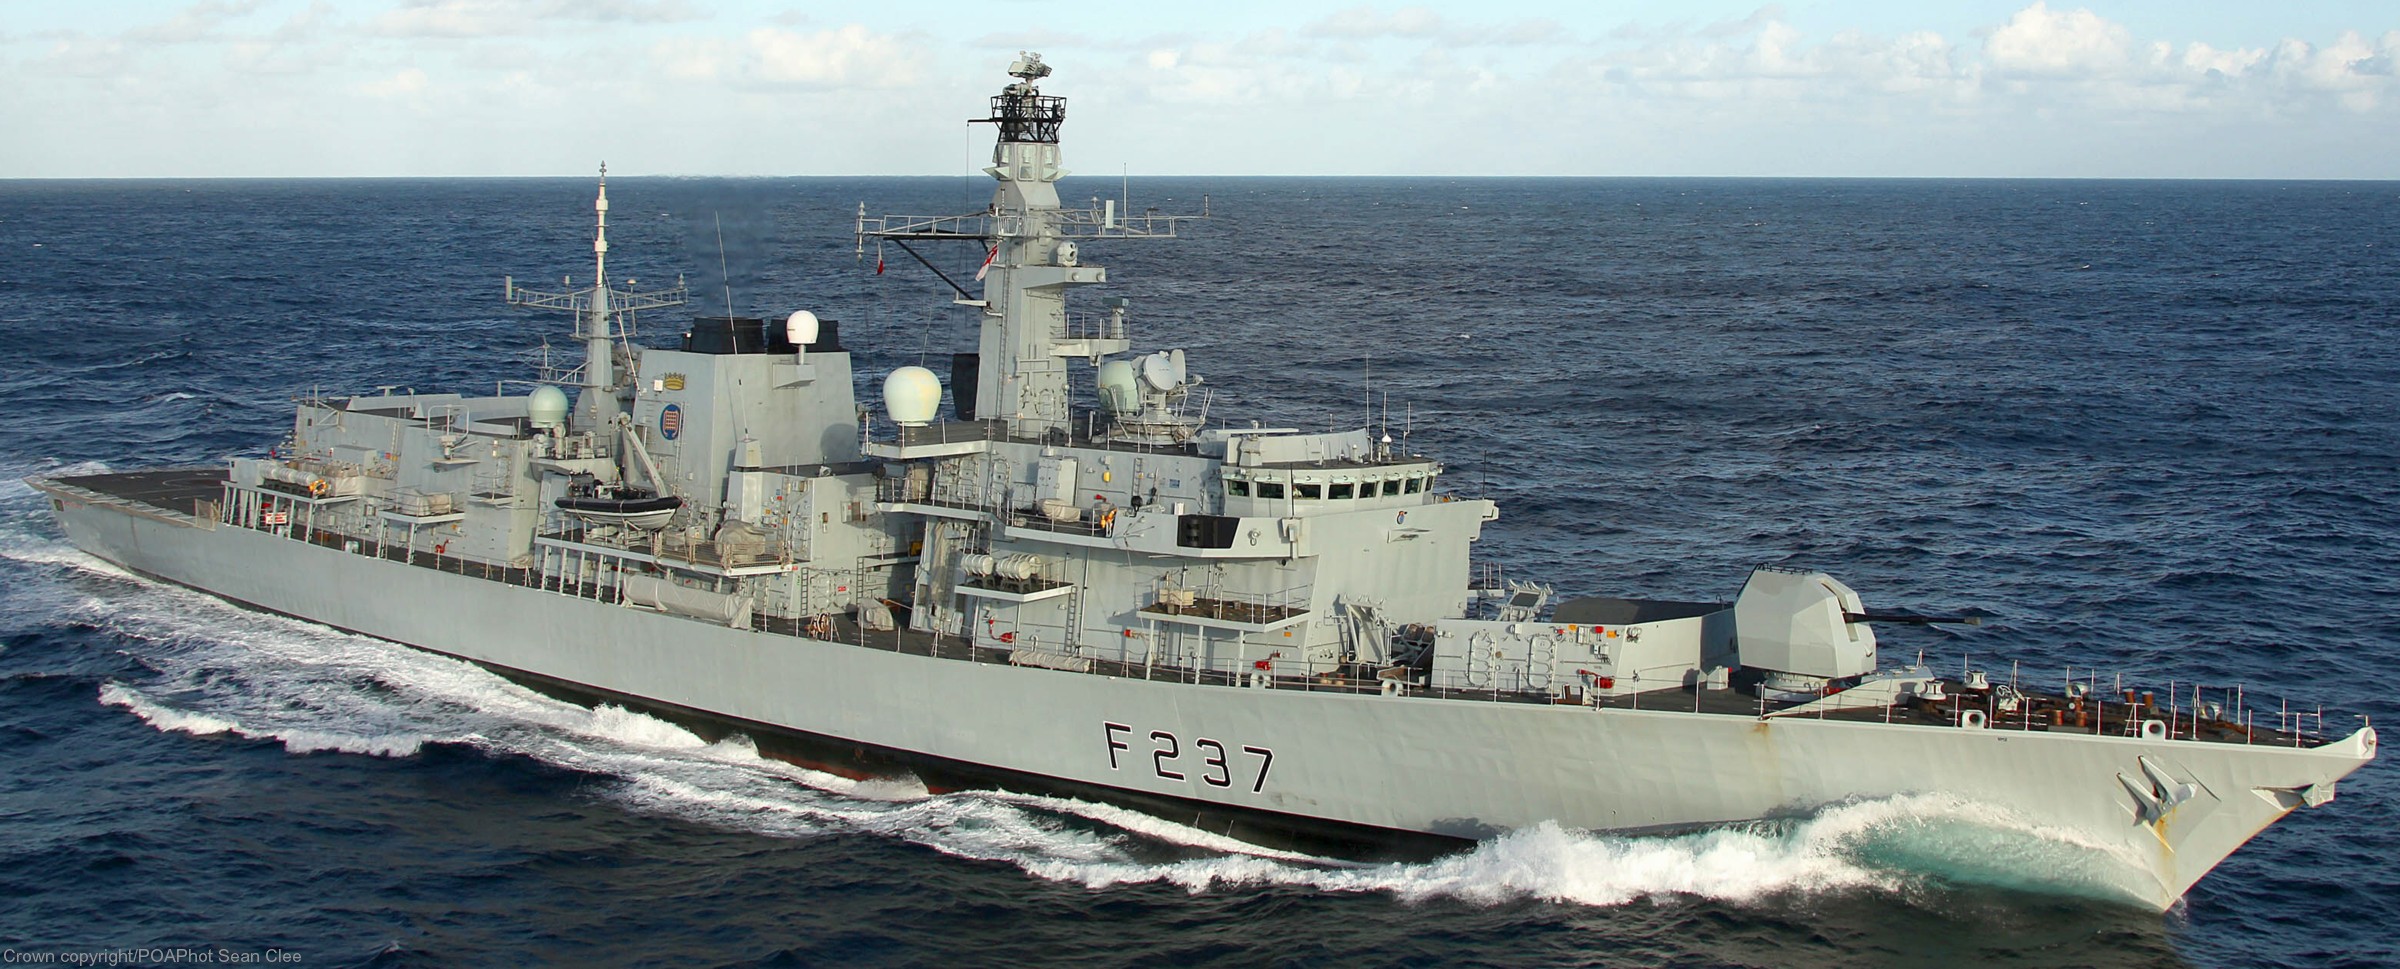 f-237 hms westminster type 23 duke class guided missile frigate ffg royal navy 06